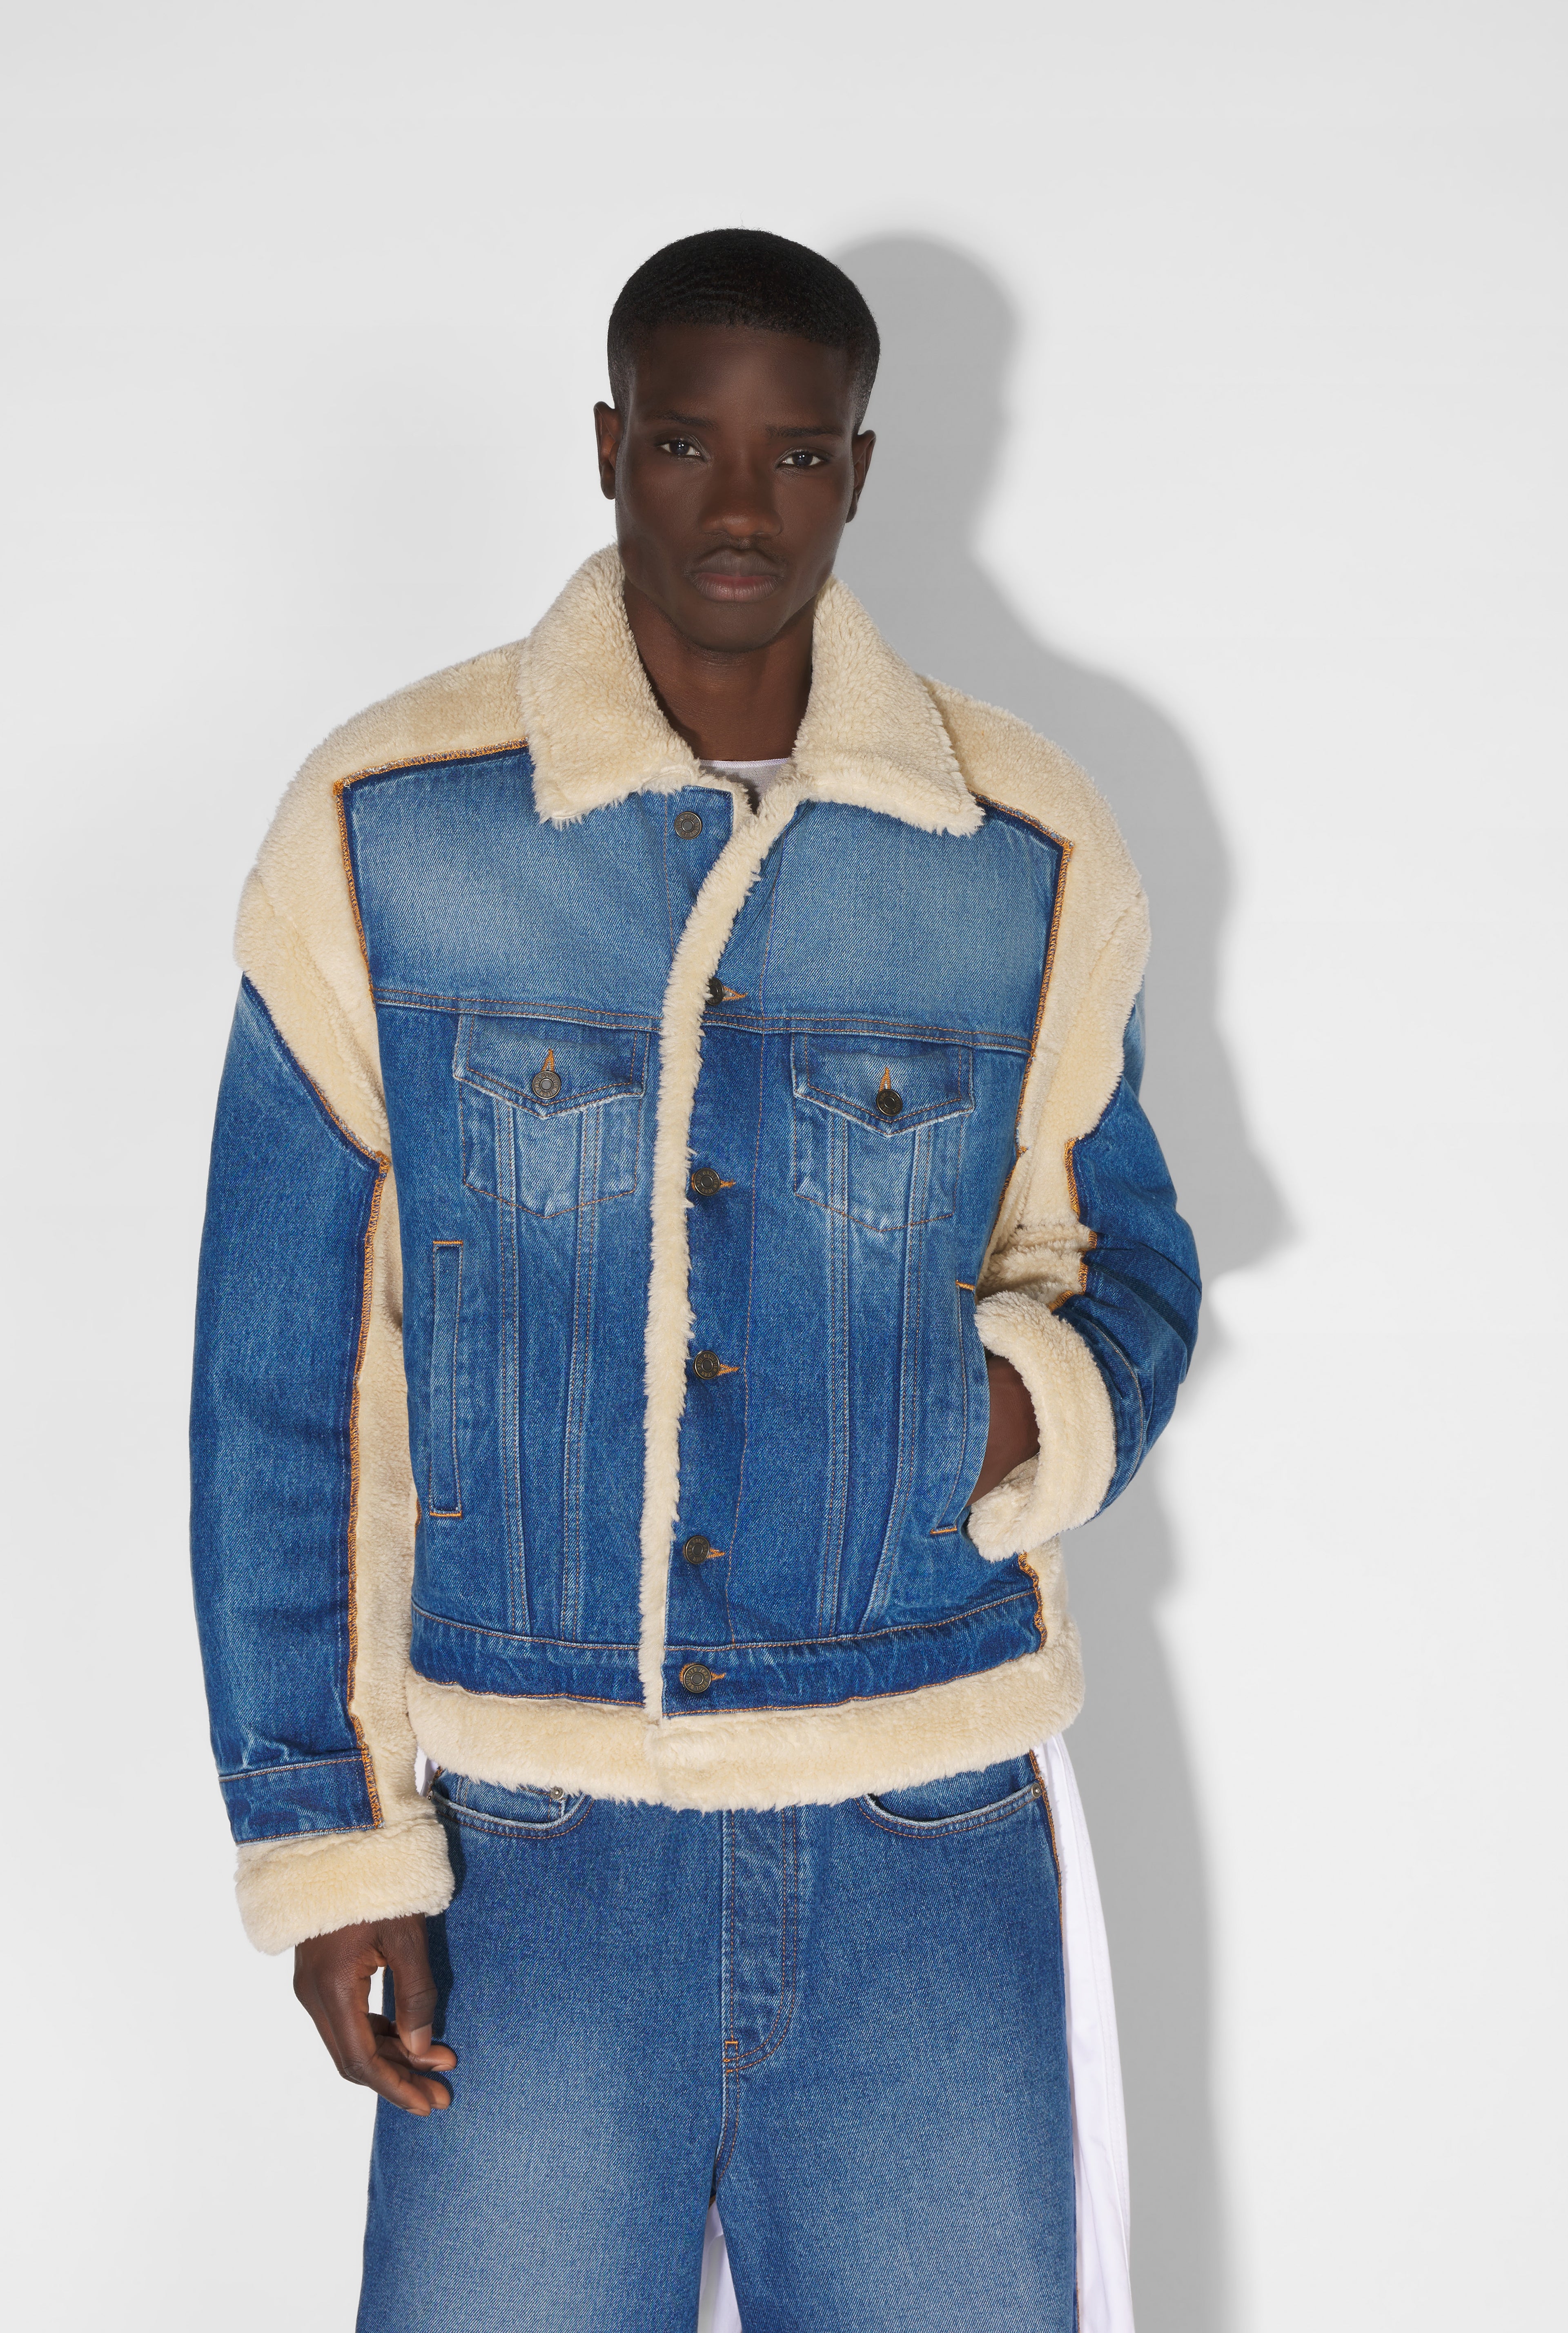 The Denim and Shearling Jacket